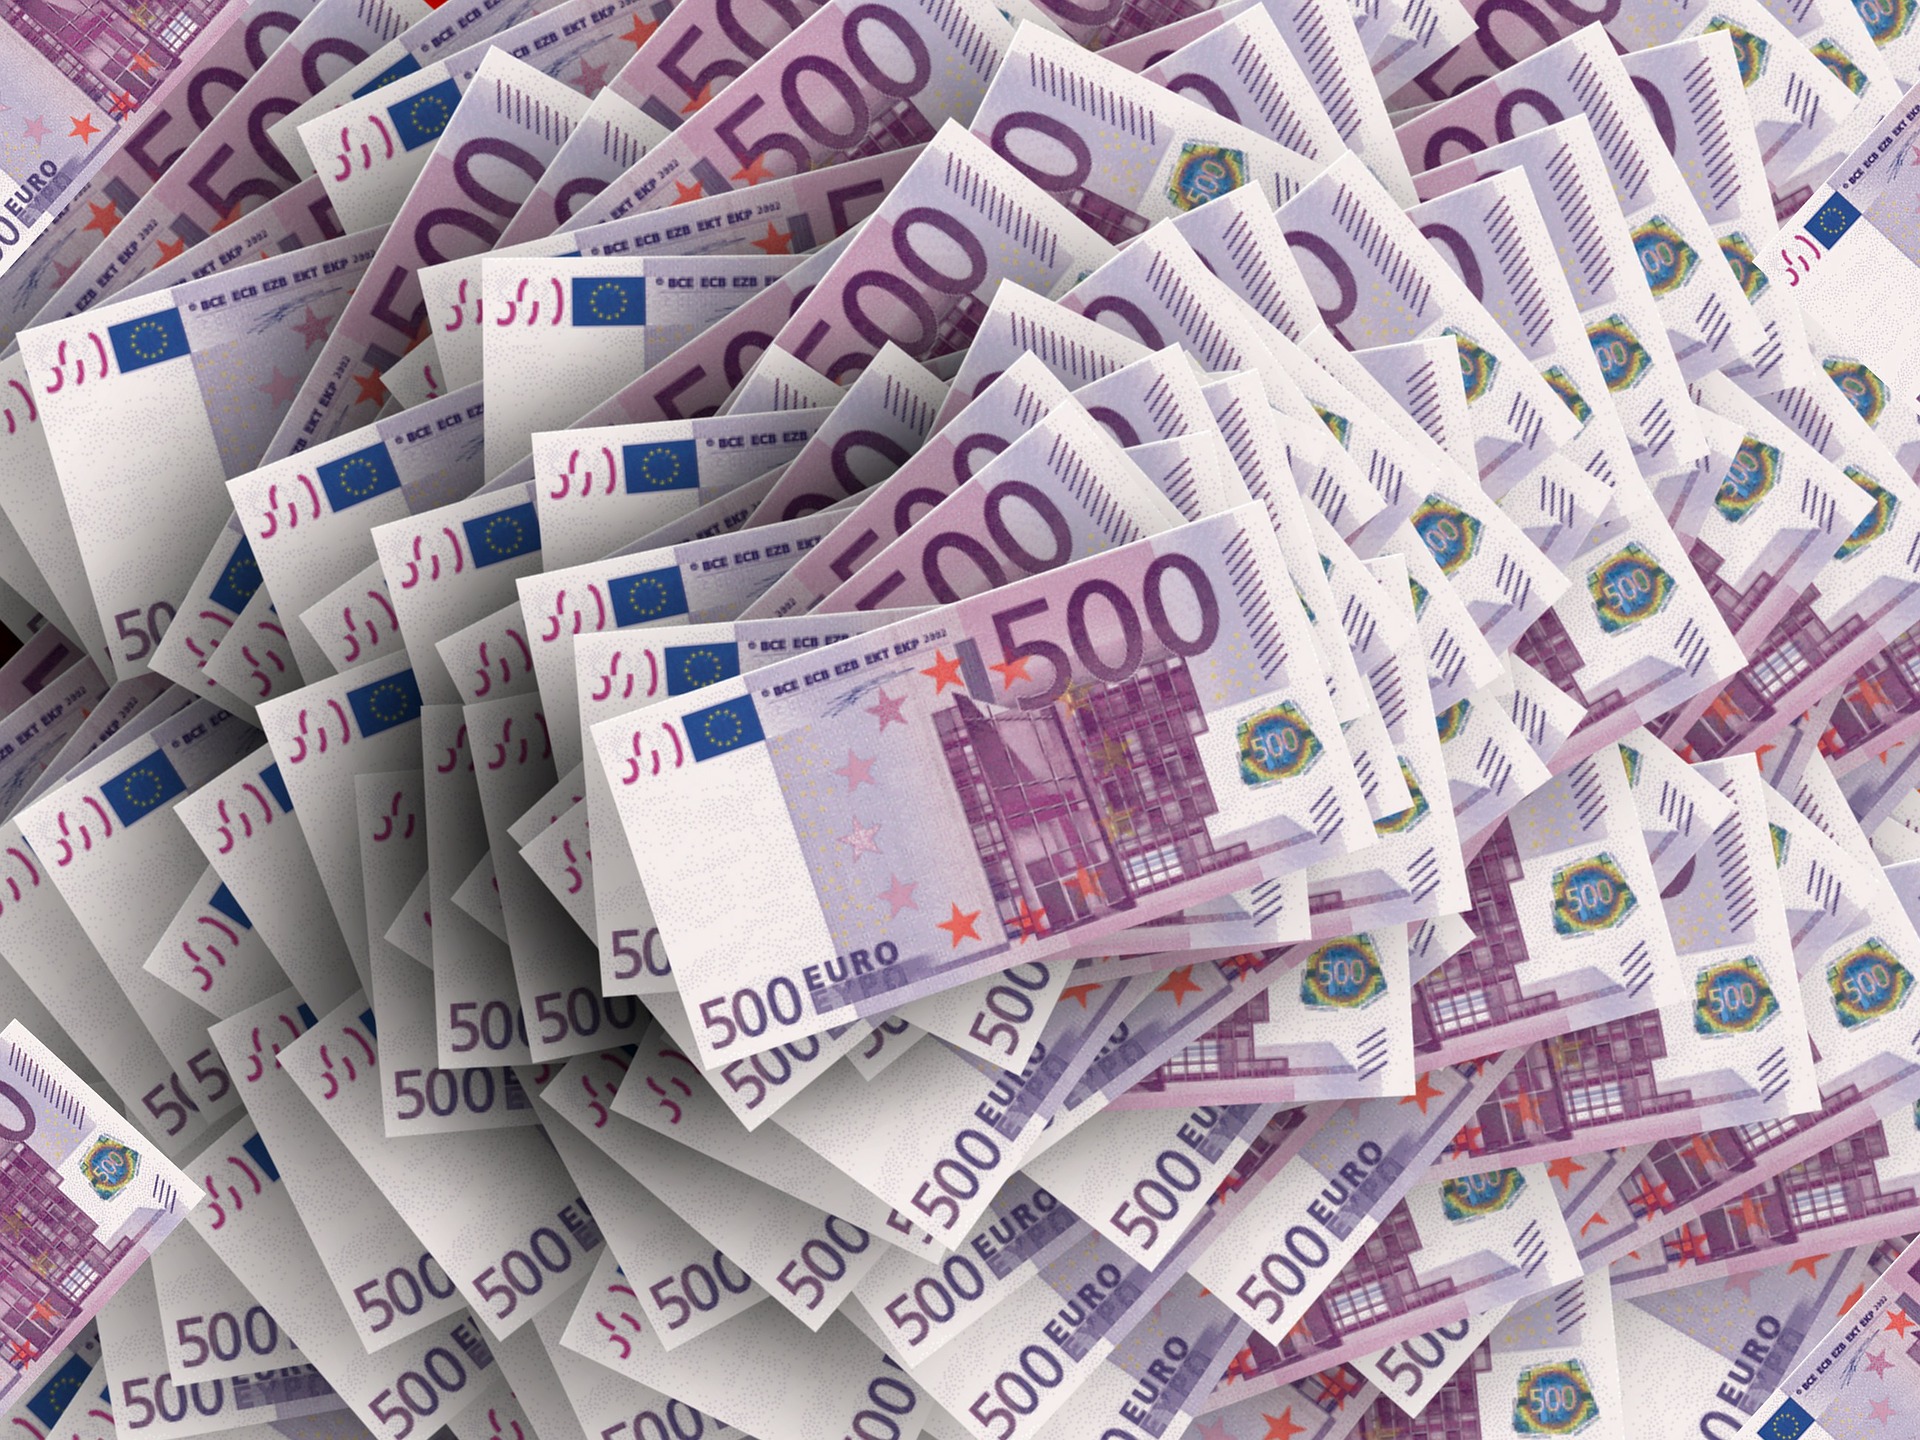 Two Men Attempt To Disperse Counterfeit Euros Worth More Than Huf 100 Million